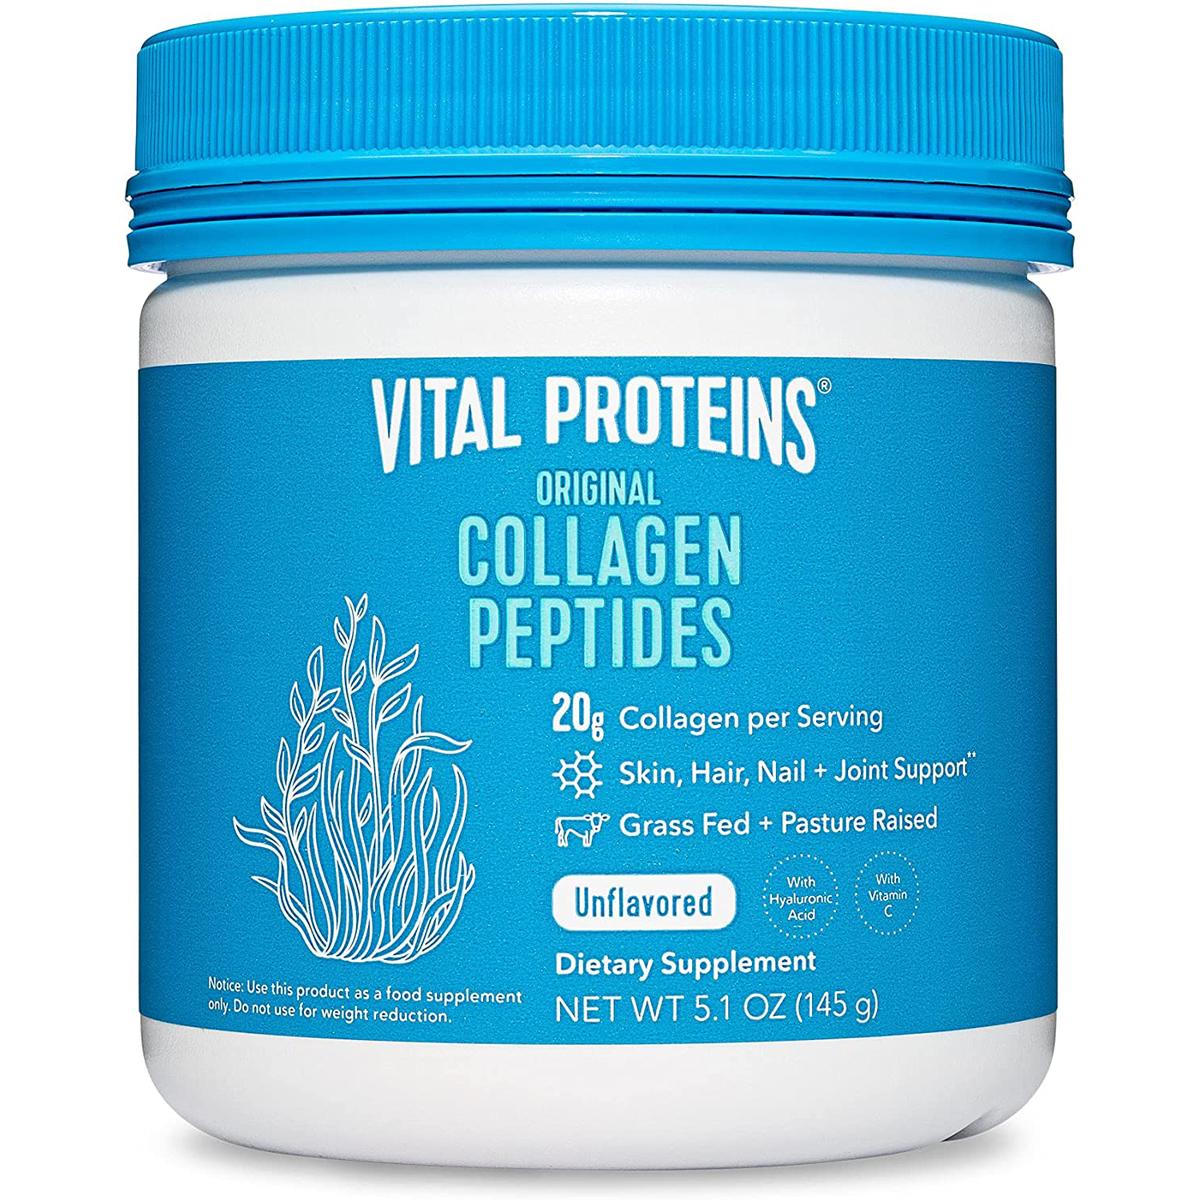 5oz Vital Proteins Collagen Peptides Powder Supplement for $6.49 Shipped